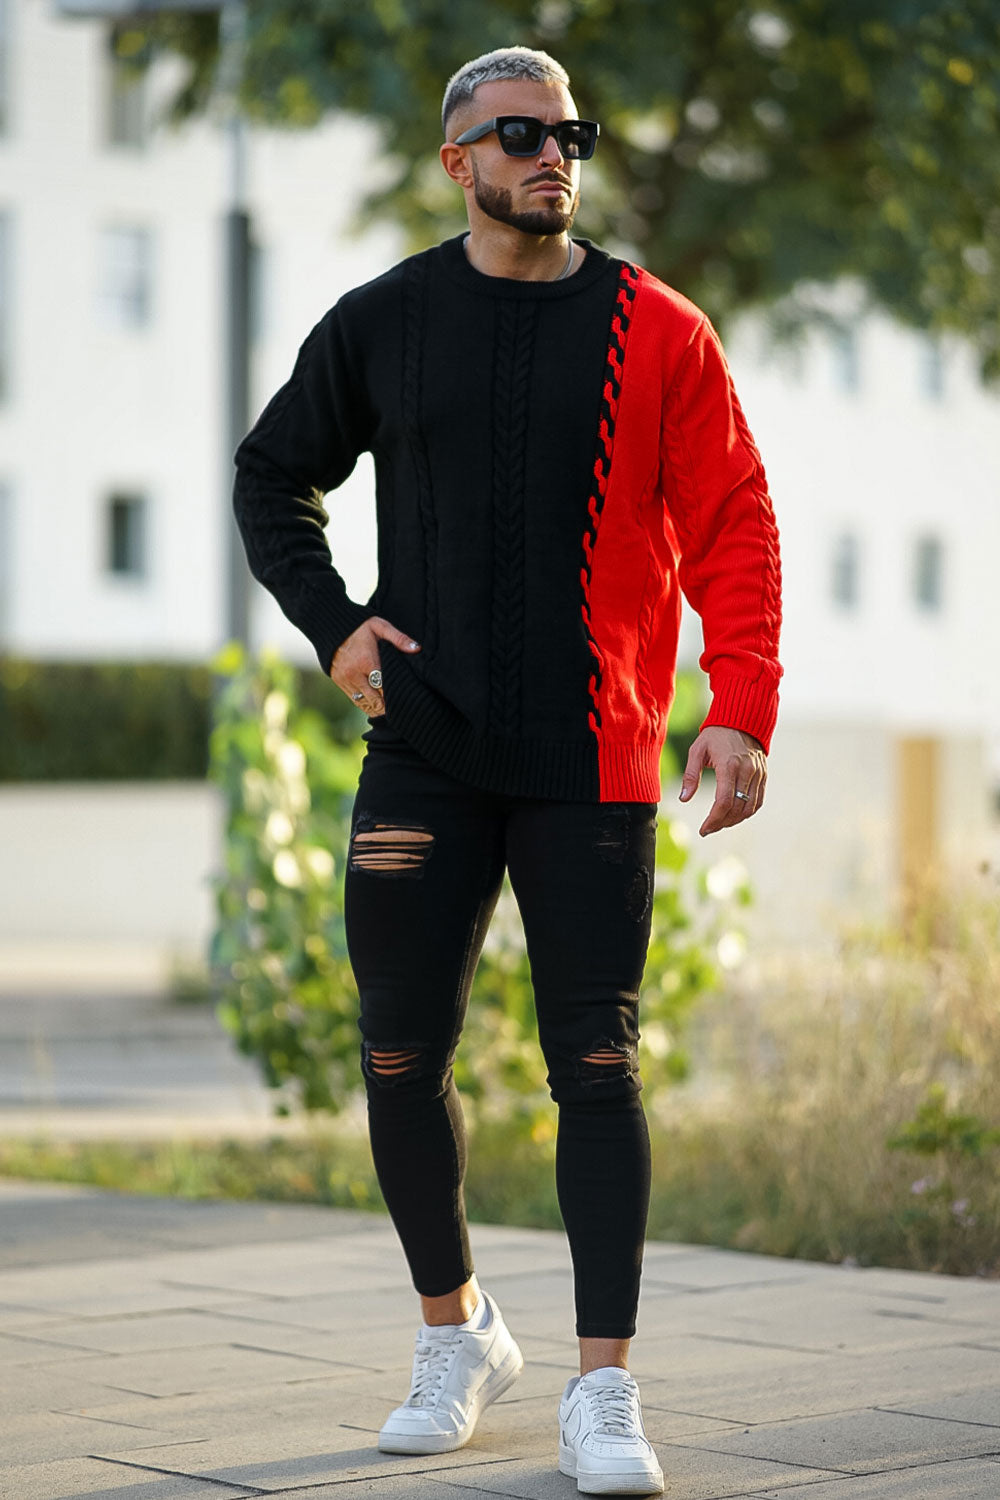 Gingtto Mens Sweater Long Sleeve Slim Fit Black And Red Sweater